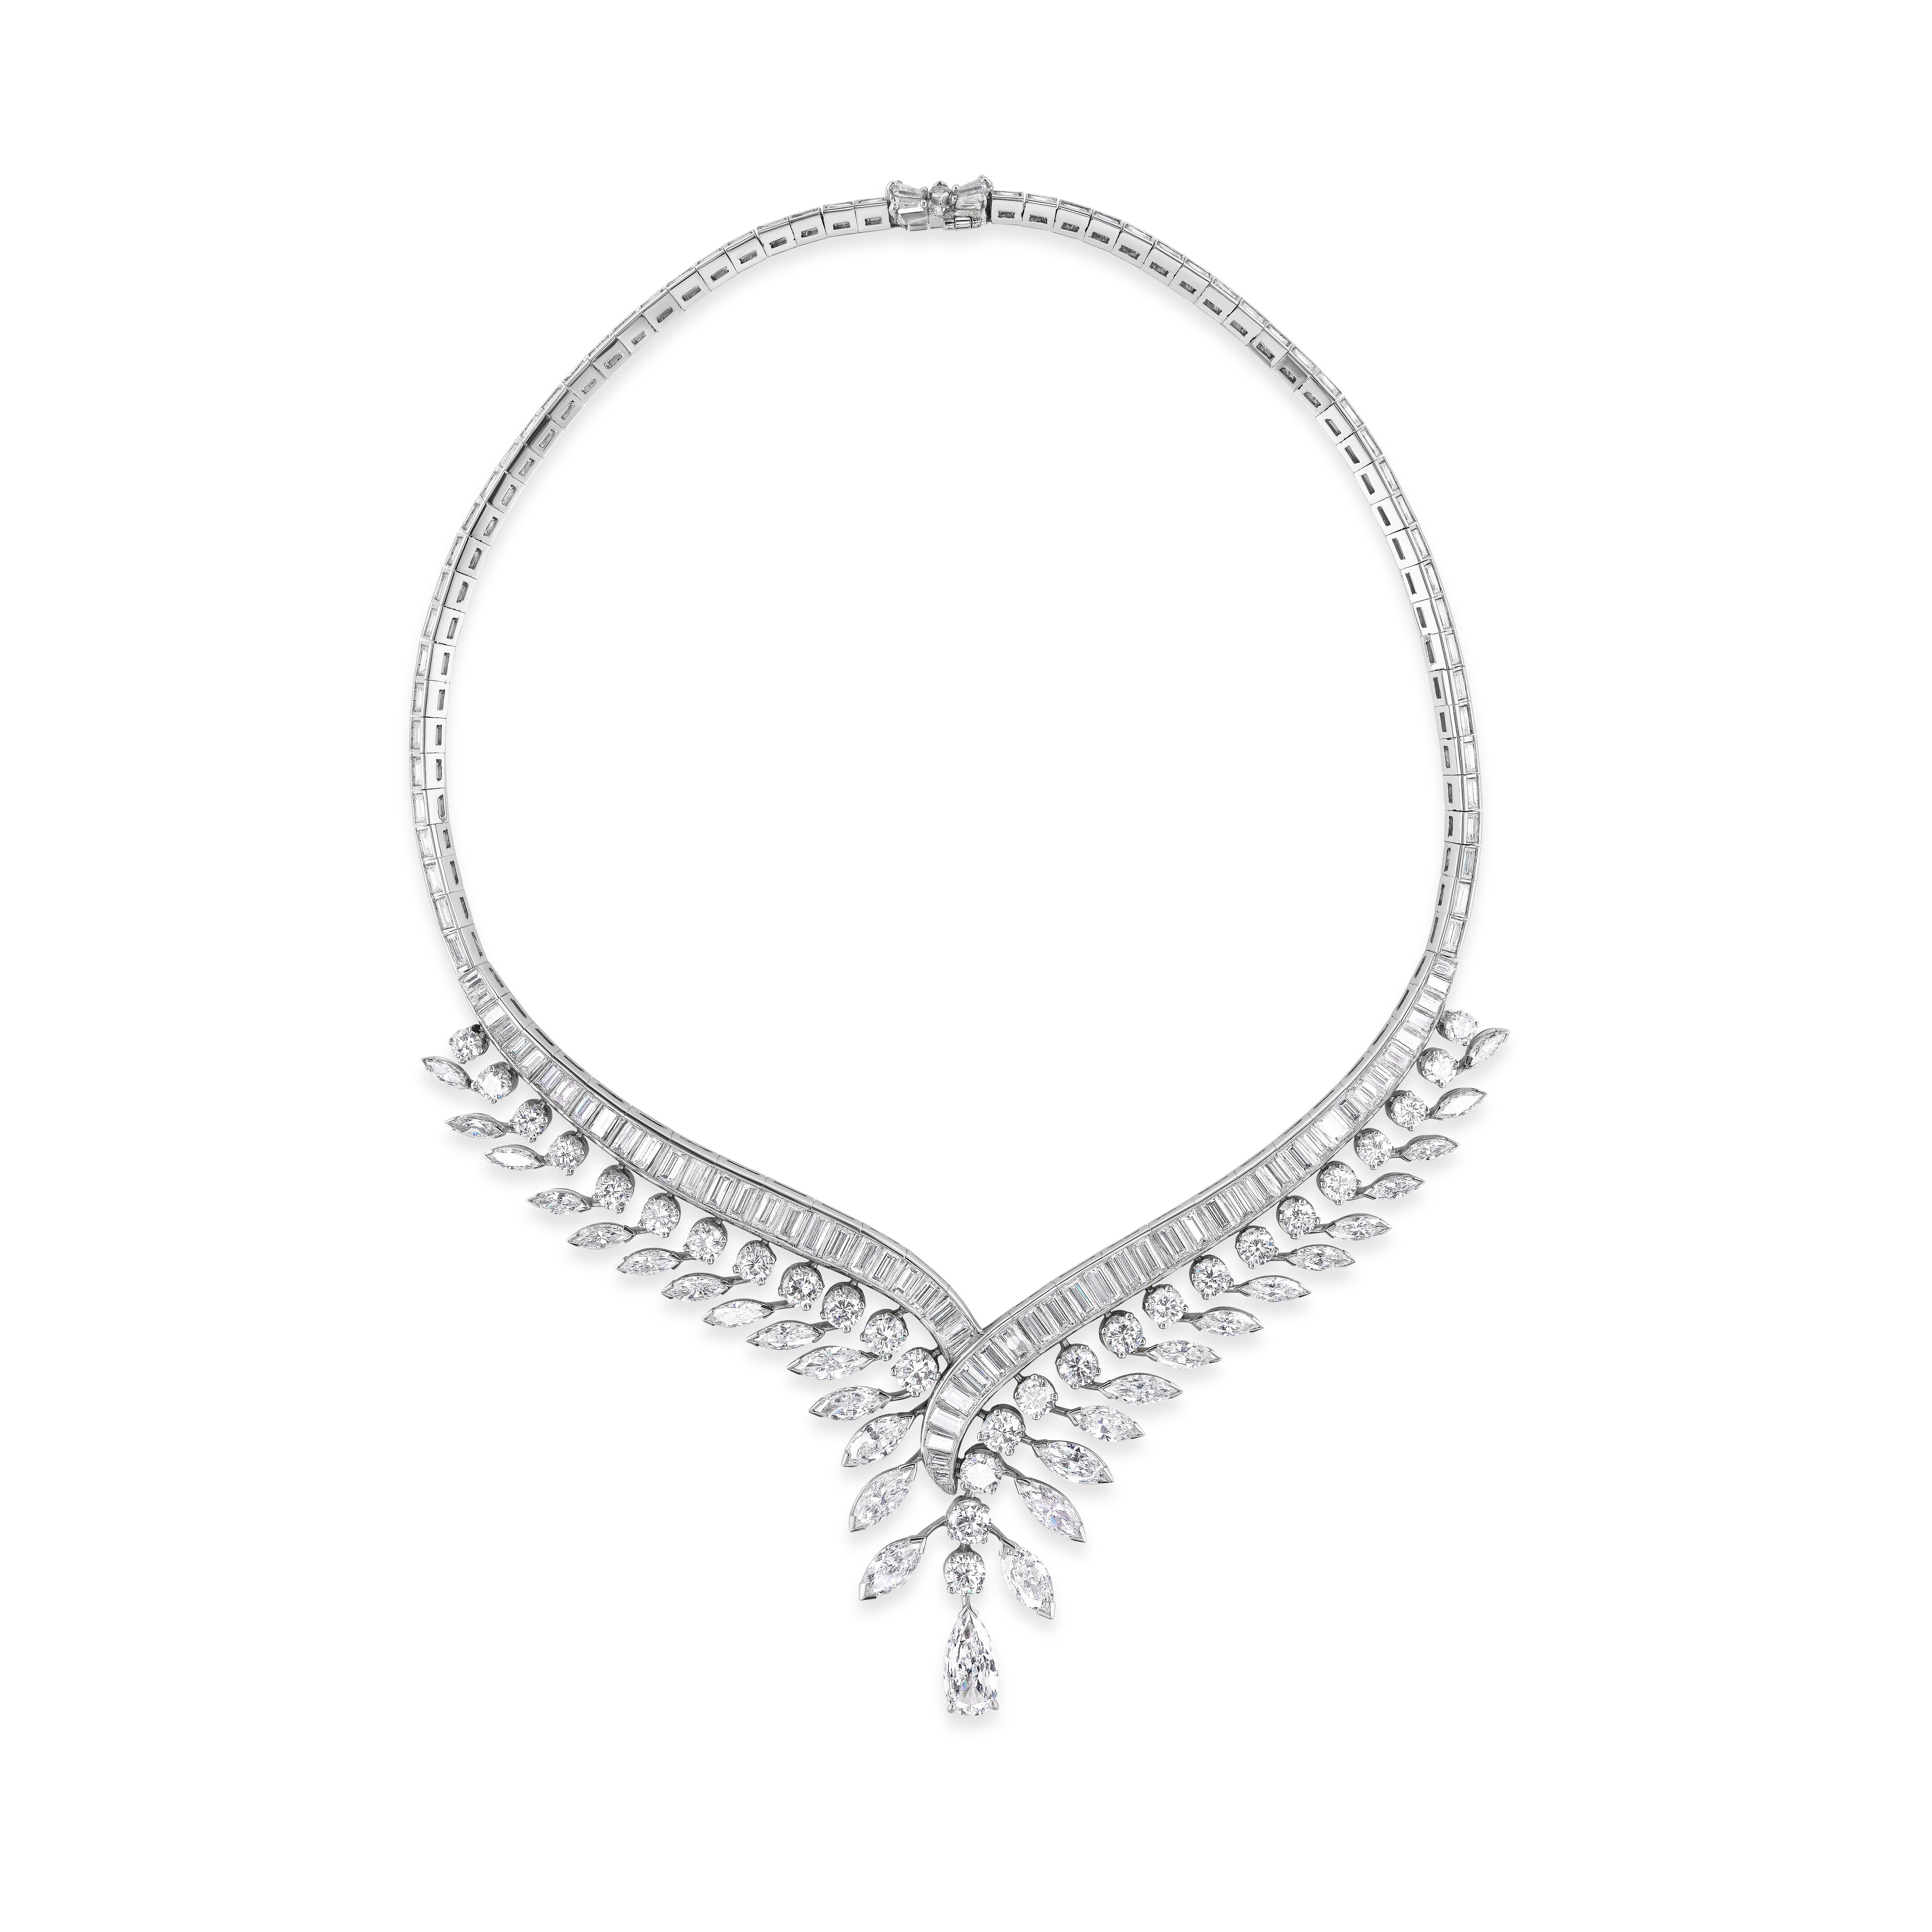 This elegant platinum feather design necklace features round brilliant and marquise diamond vanes emanating from a quill of carefully selected graduating baguettes brought wonderfully together by a single elongated pear shape diamond of